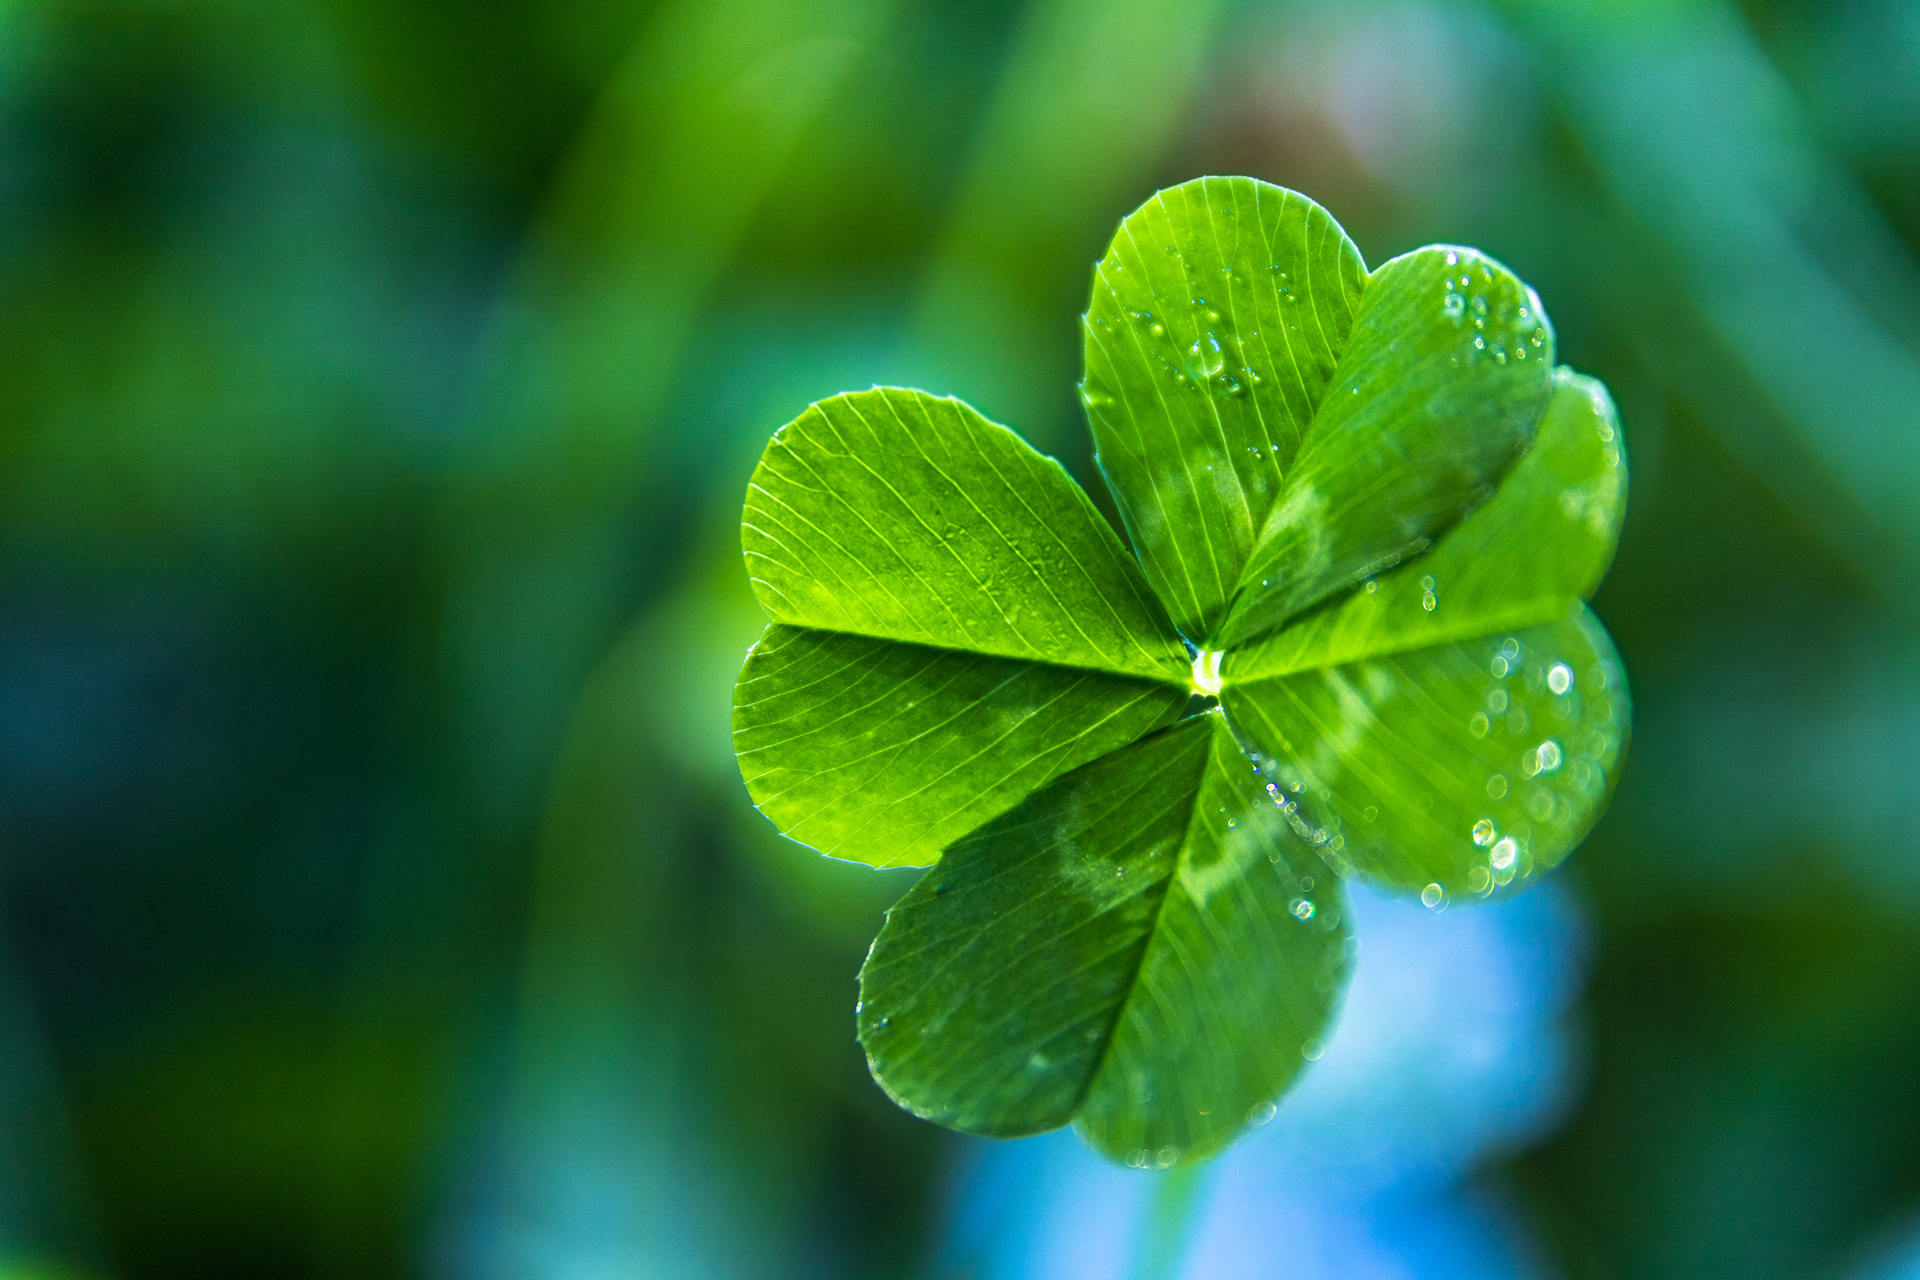 A close up of a real green 4-leaf clover with dew on it and a blue and green soft-focus background